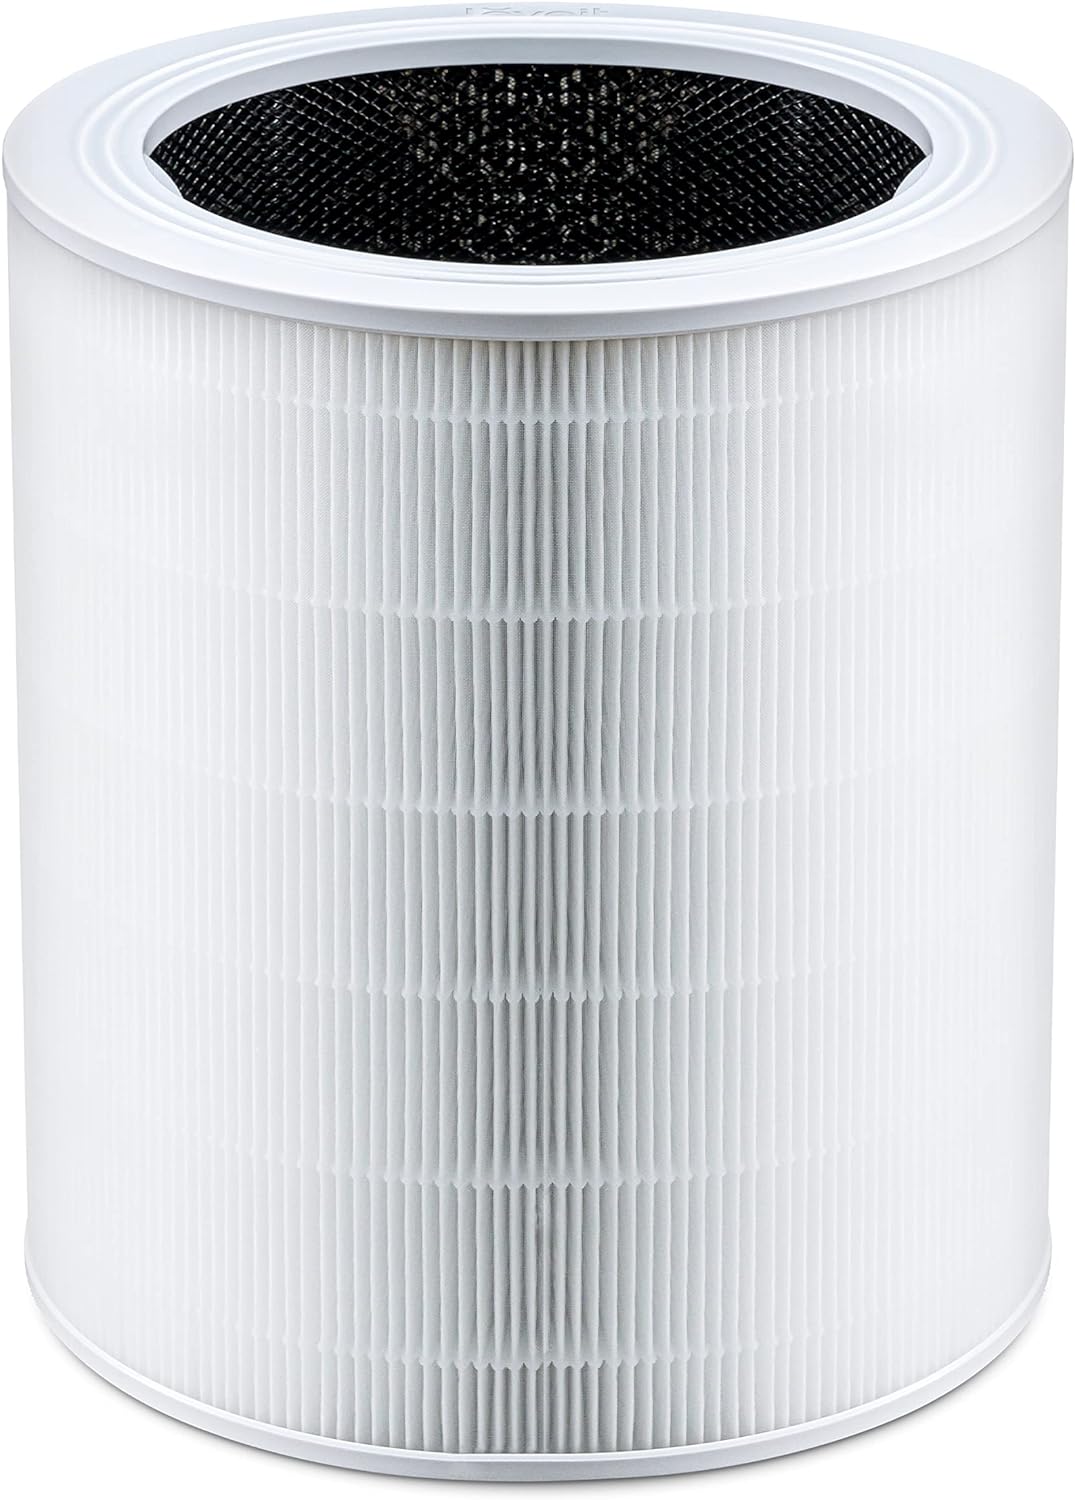 LEVOIT Core 600S Air Purifier 3-in-1 Replacement Filter, Core 600S-RF, 1Pack, White